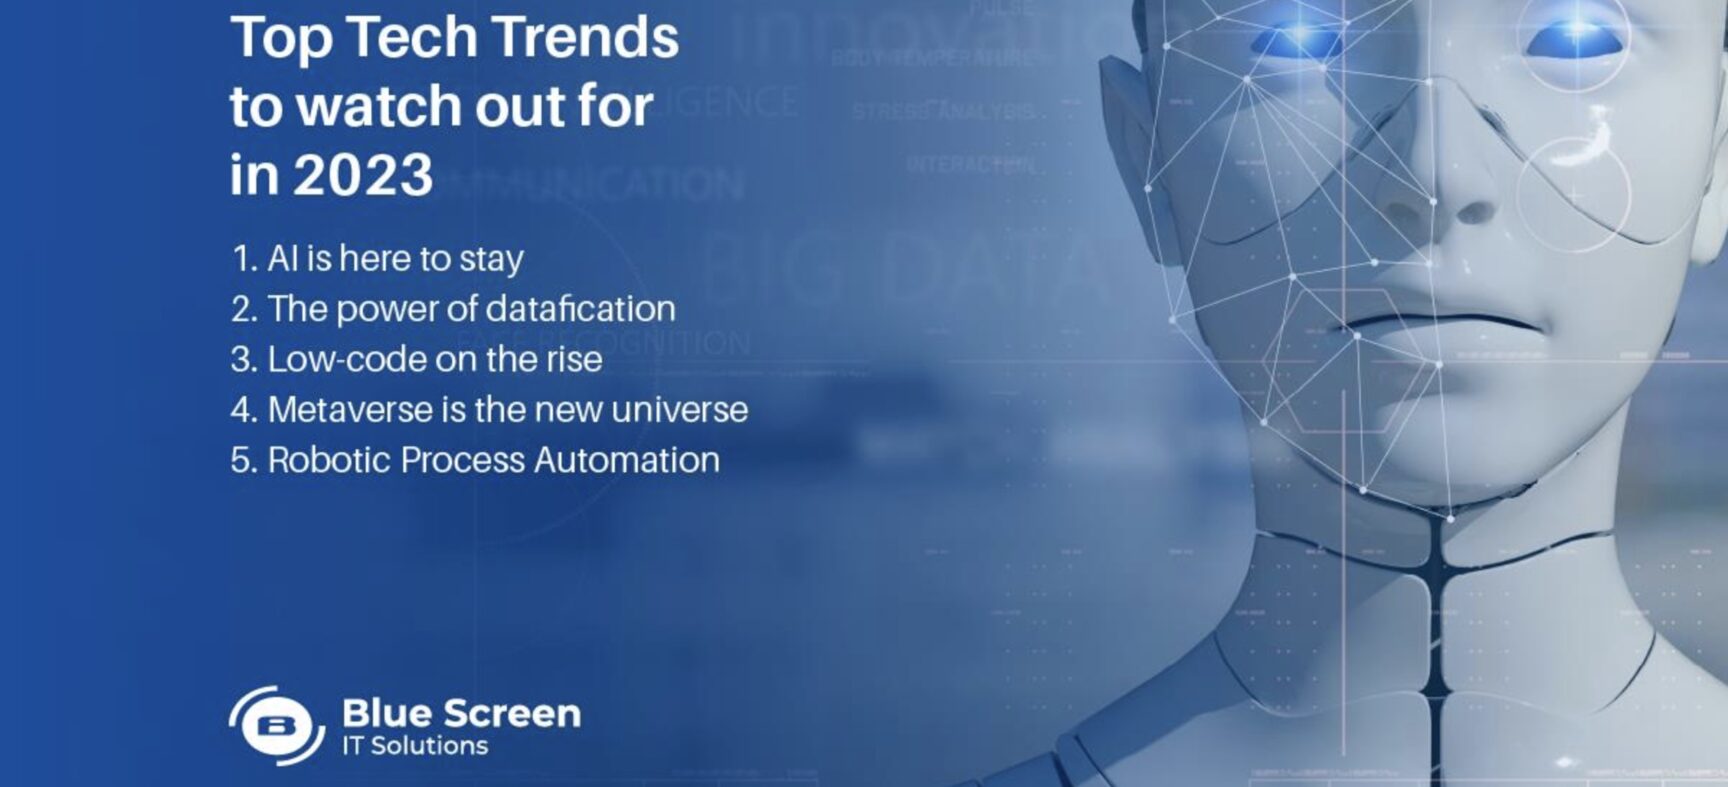 Top Tech Trends to watch out for in 2023